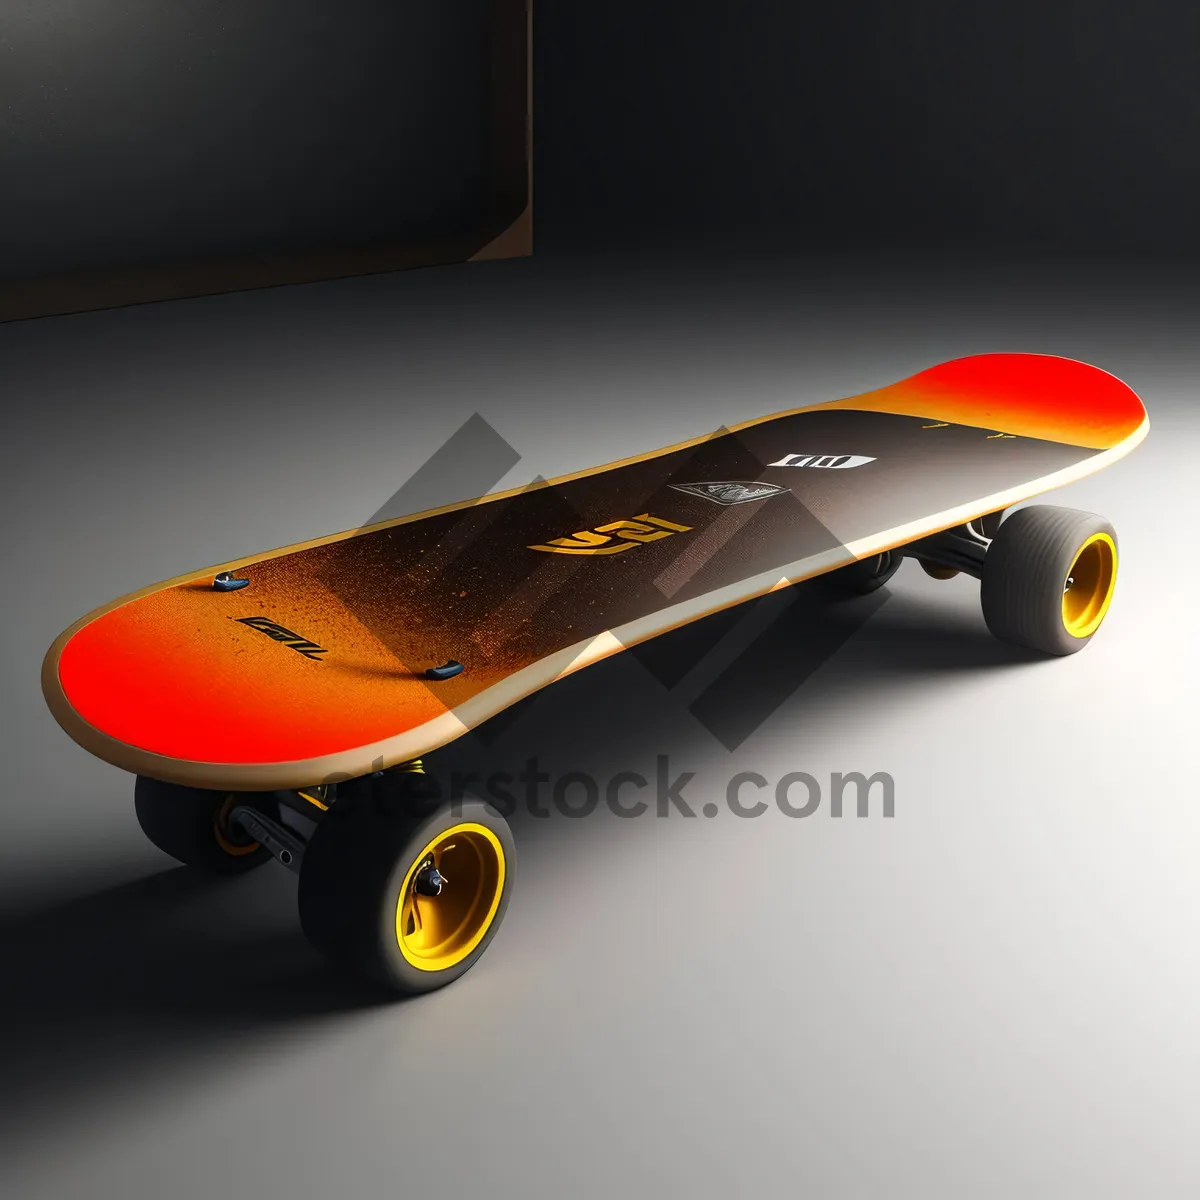 Picture of Propelled Skateboard Flying Mechanism